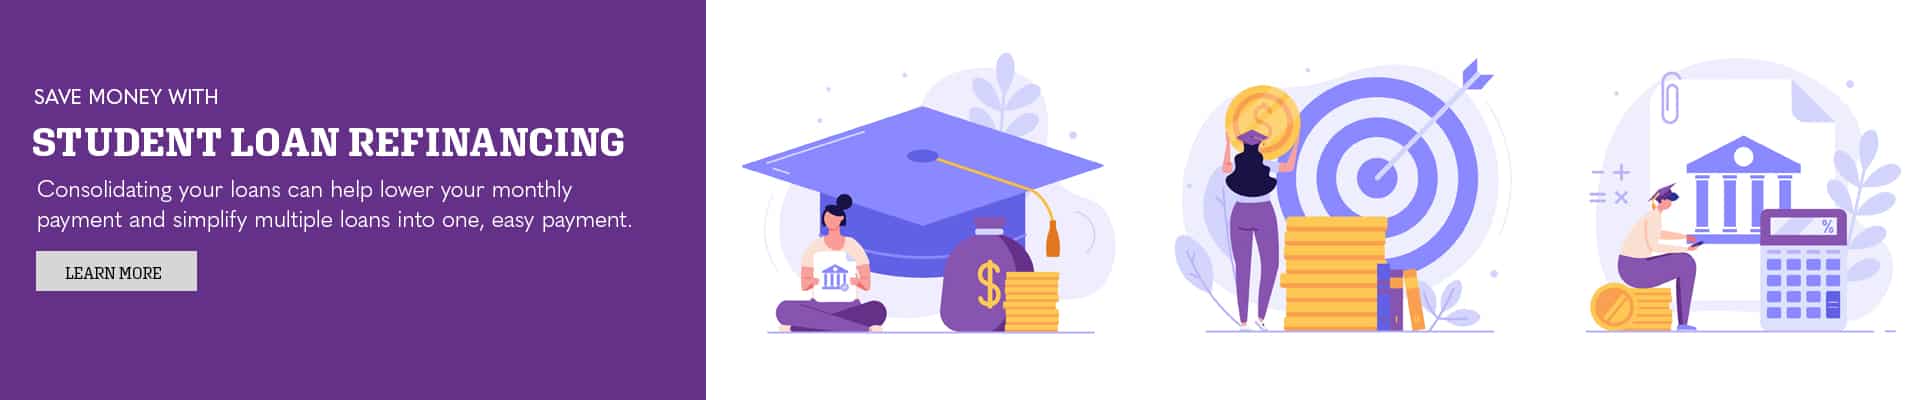 student consolidation loans